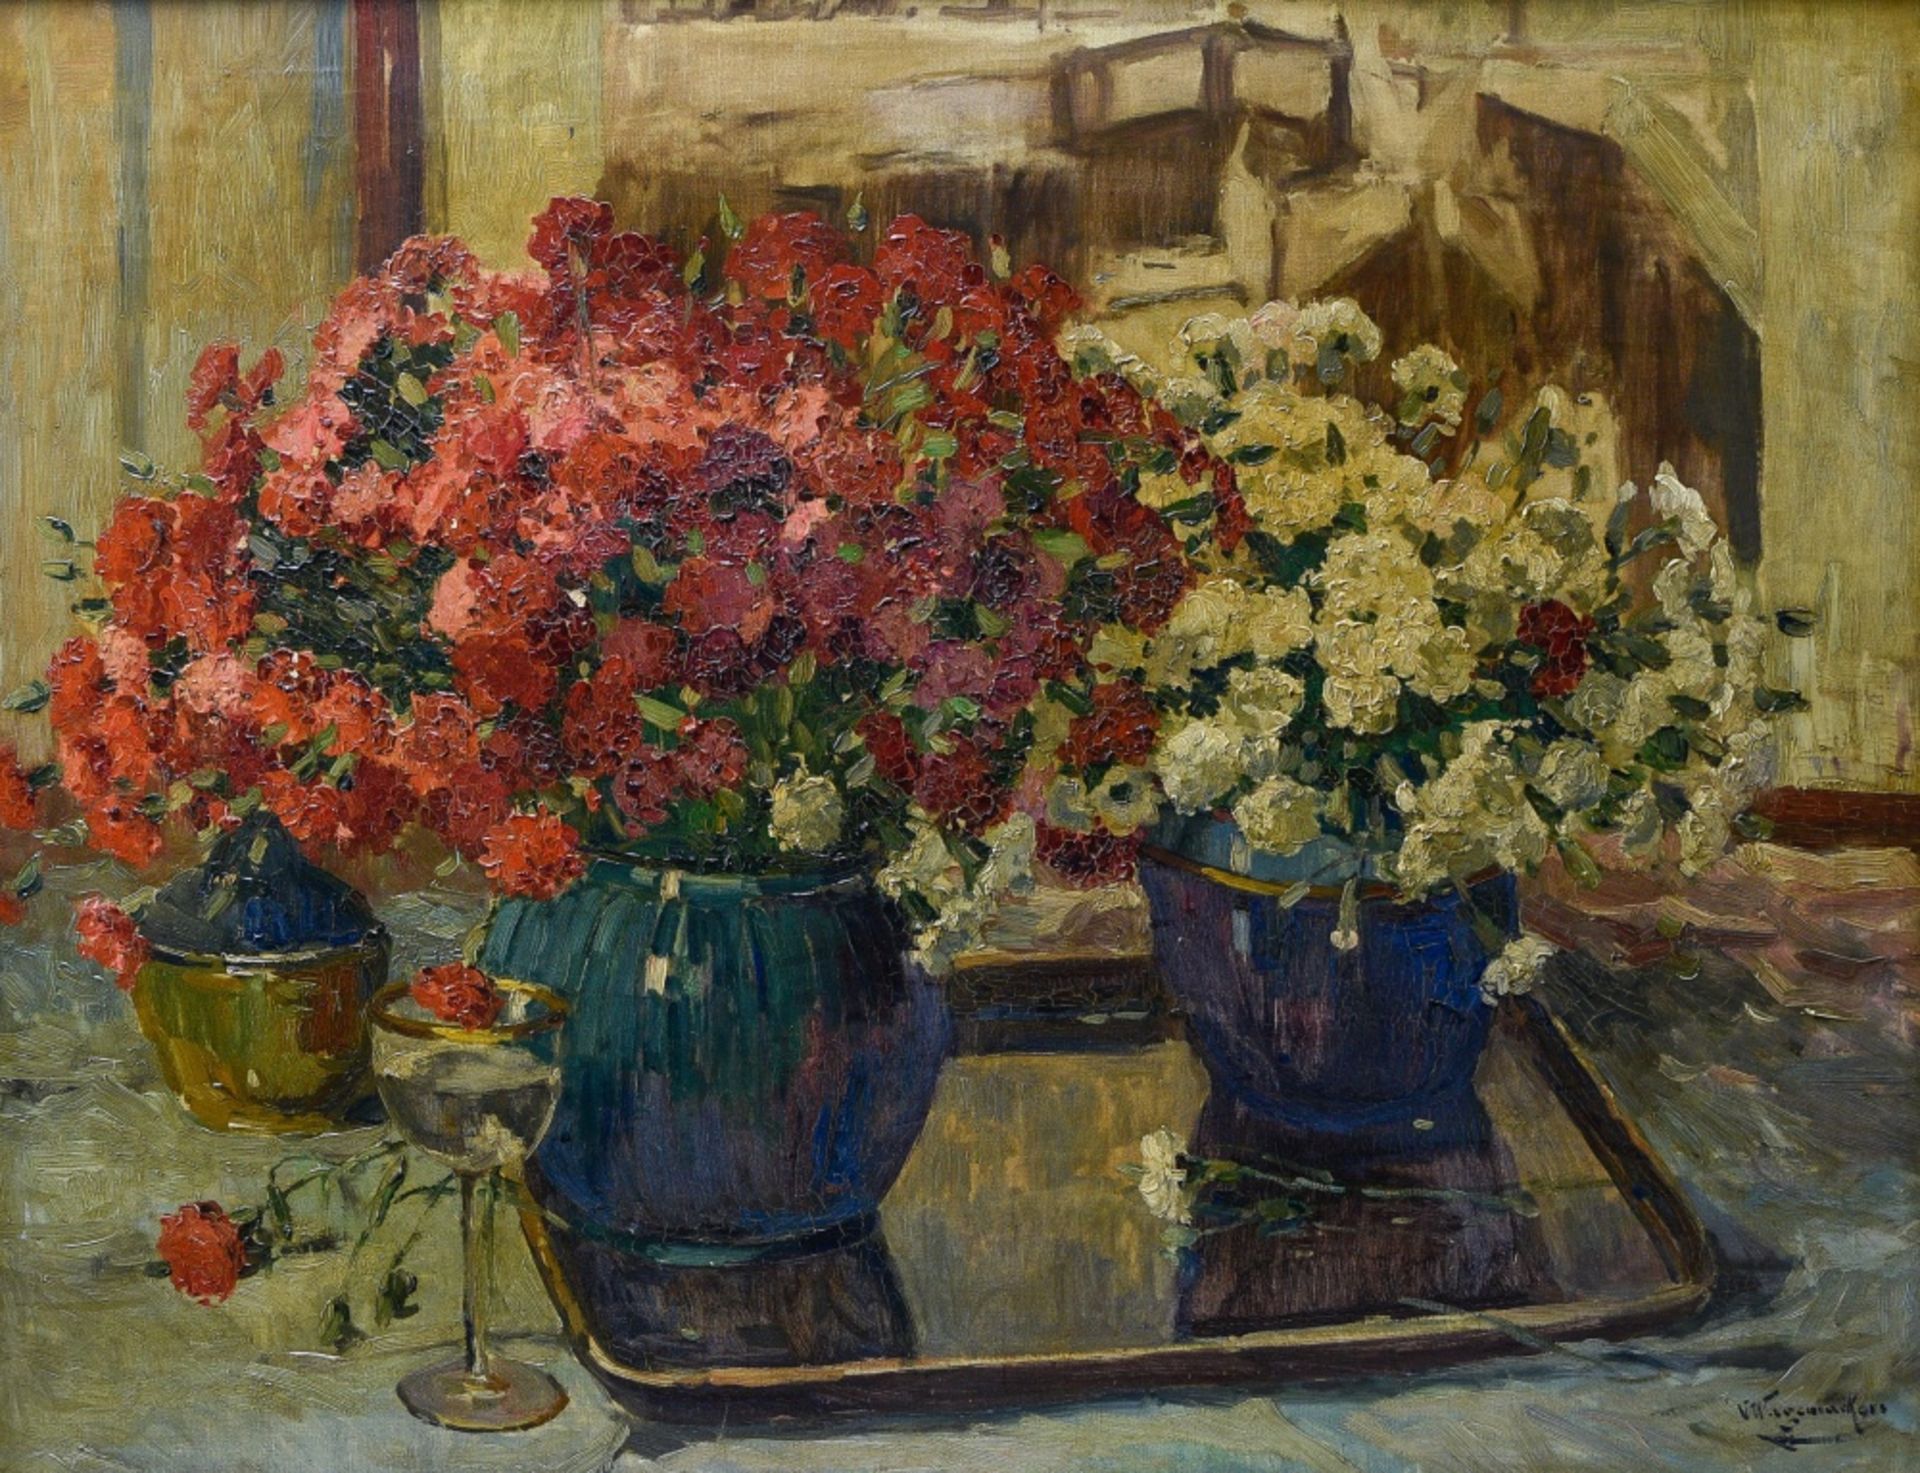 Victor WAGEMAEKERS (1876-1953) Floral composition, Oil on canvas. Signed at lower right. Framed